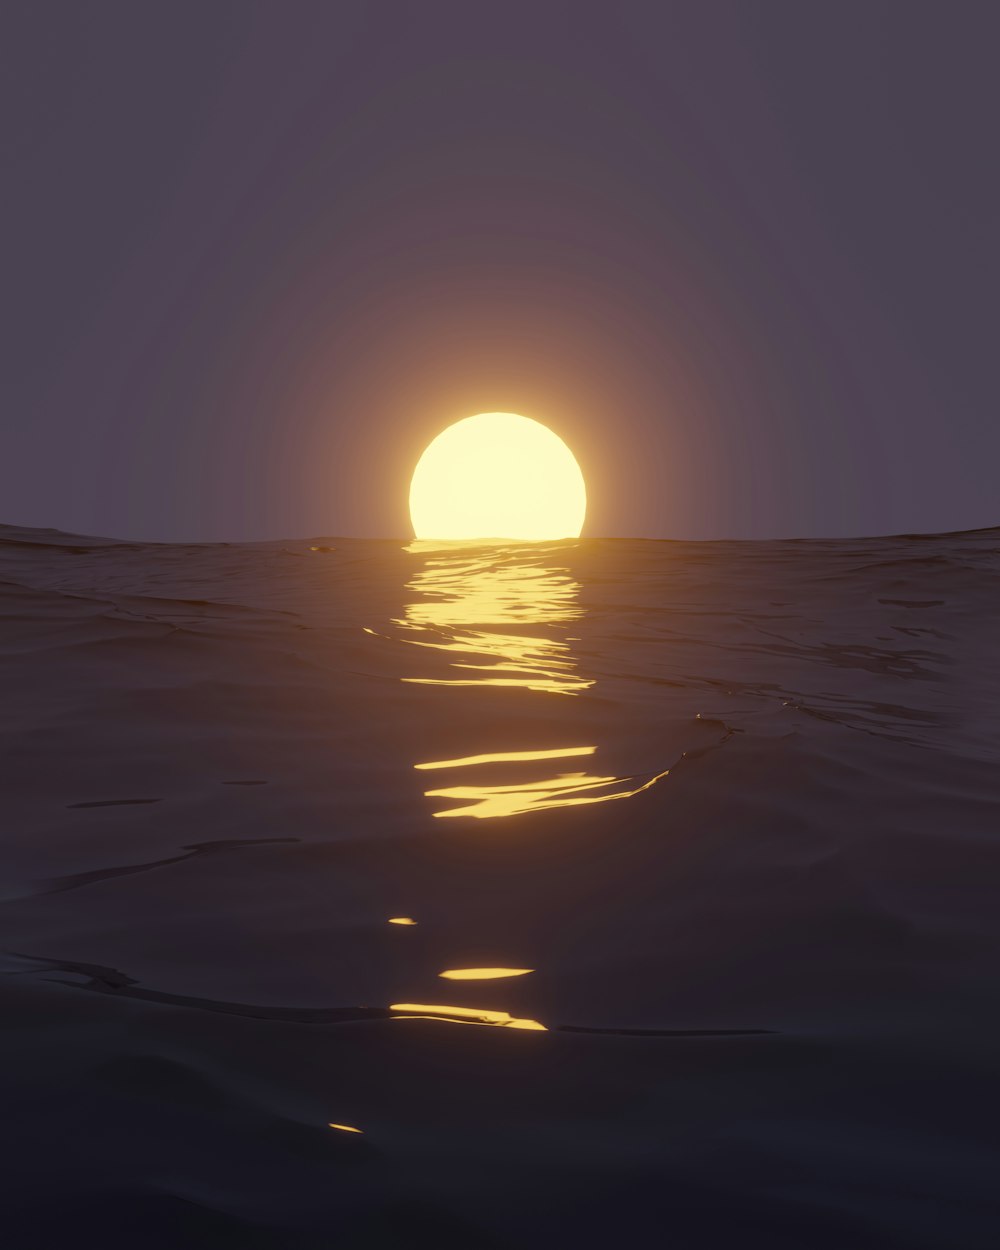 a sunset over a body of water